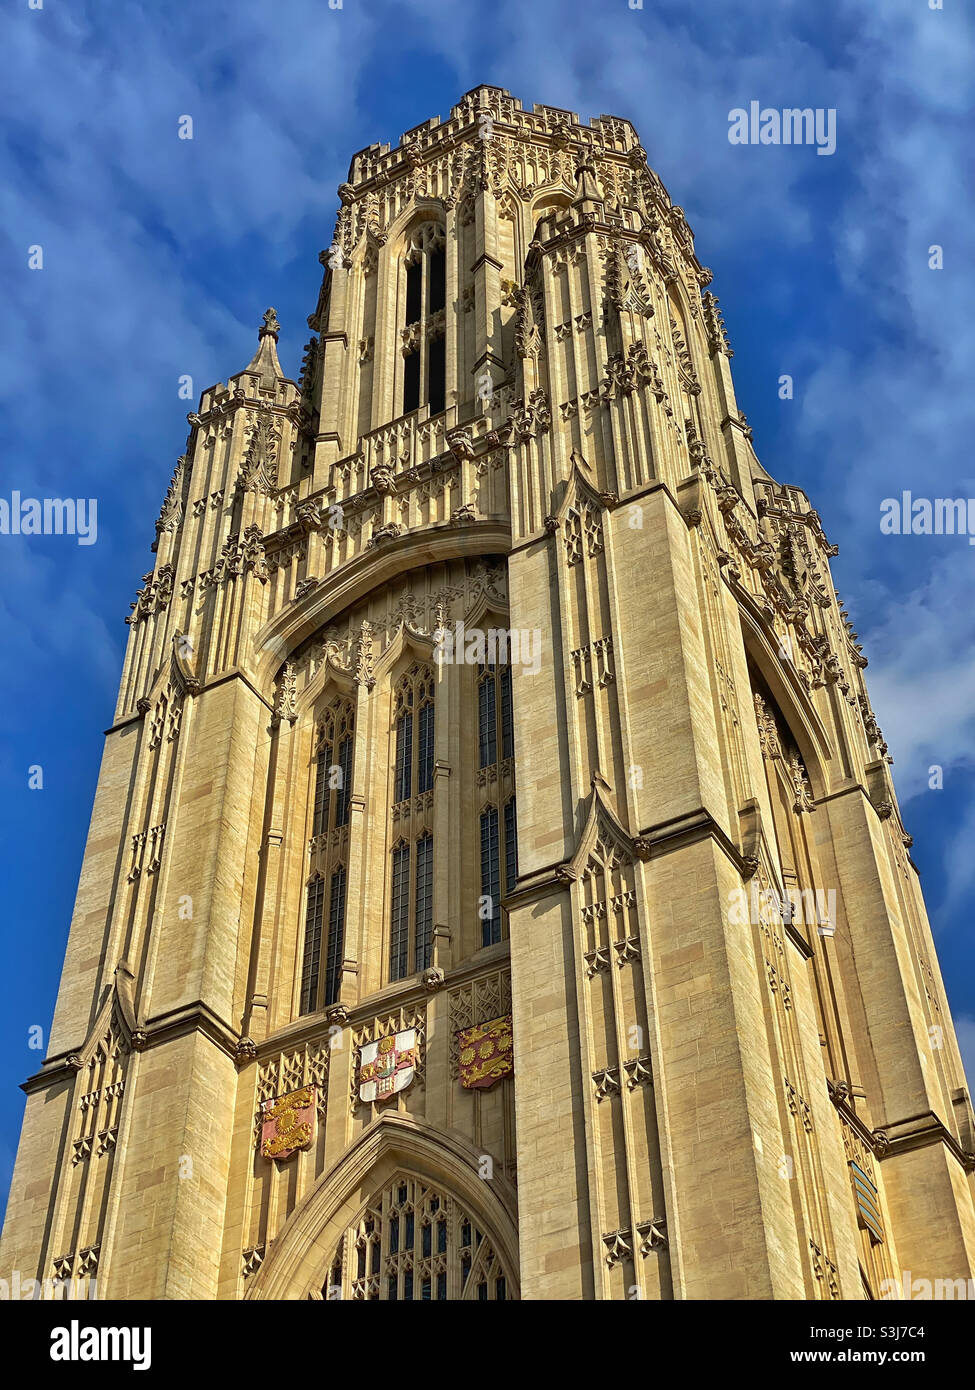 The Wills Memorial Building, also known as The Wills Memorial Tower in Bristol, England. This famous and iconic structure is believed to be one of the last great Gothic constructions in England. ©️ Stock Photo